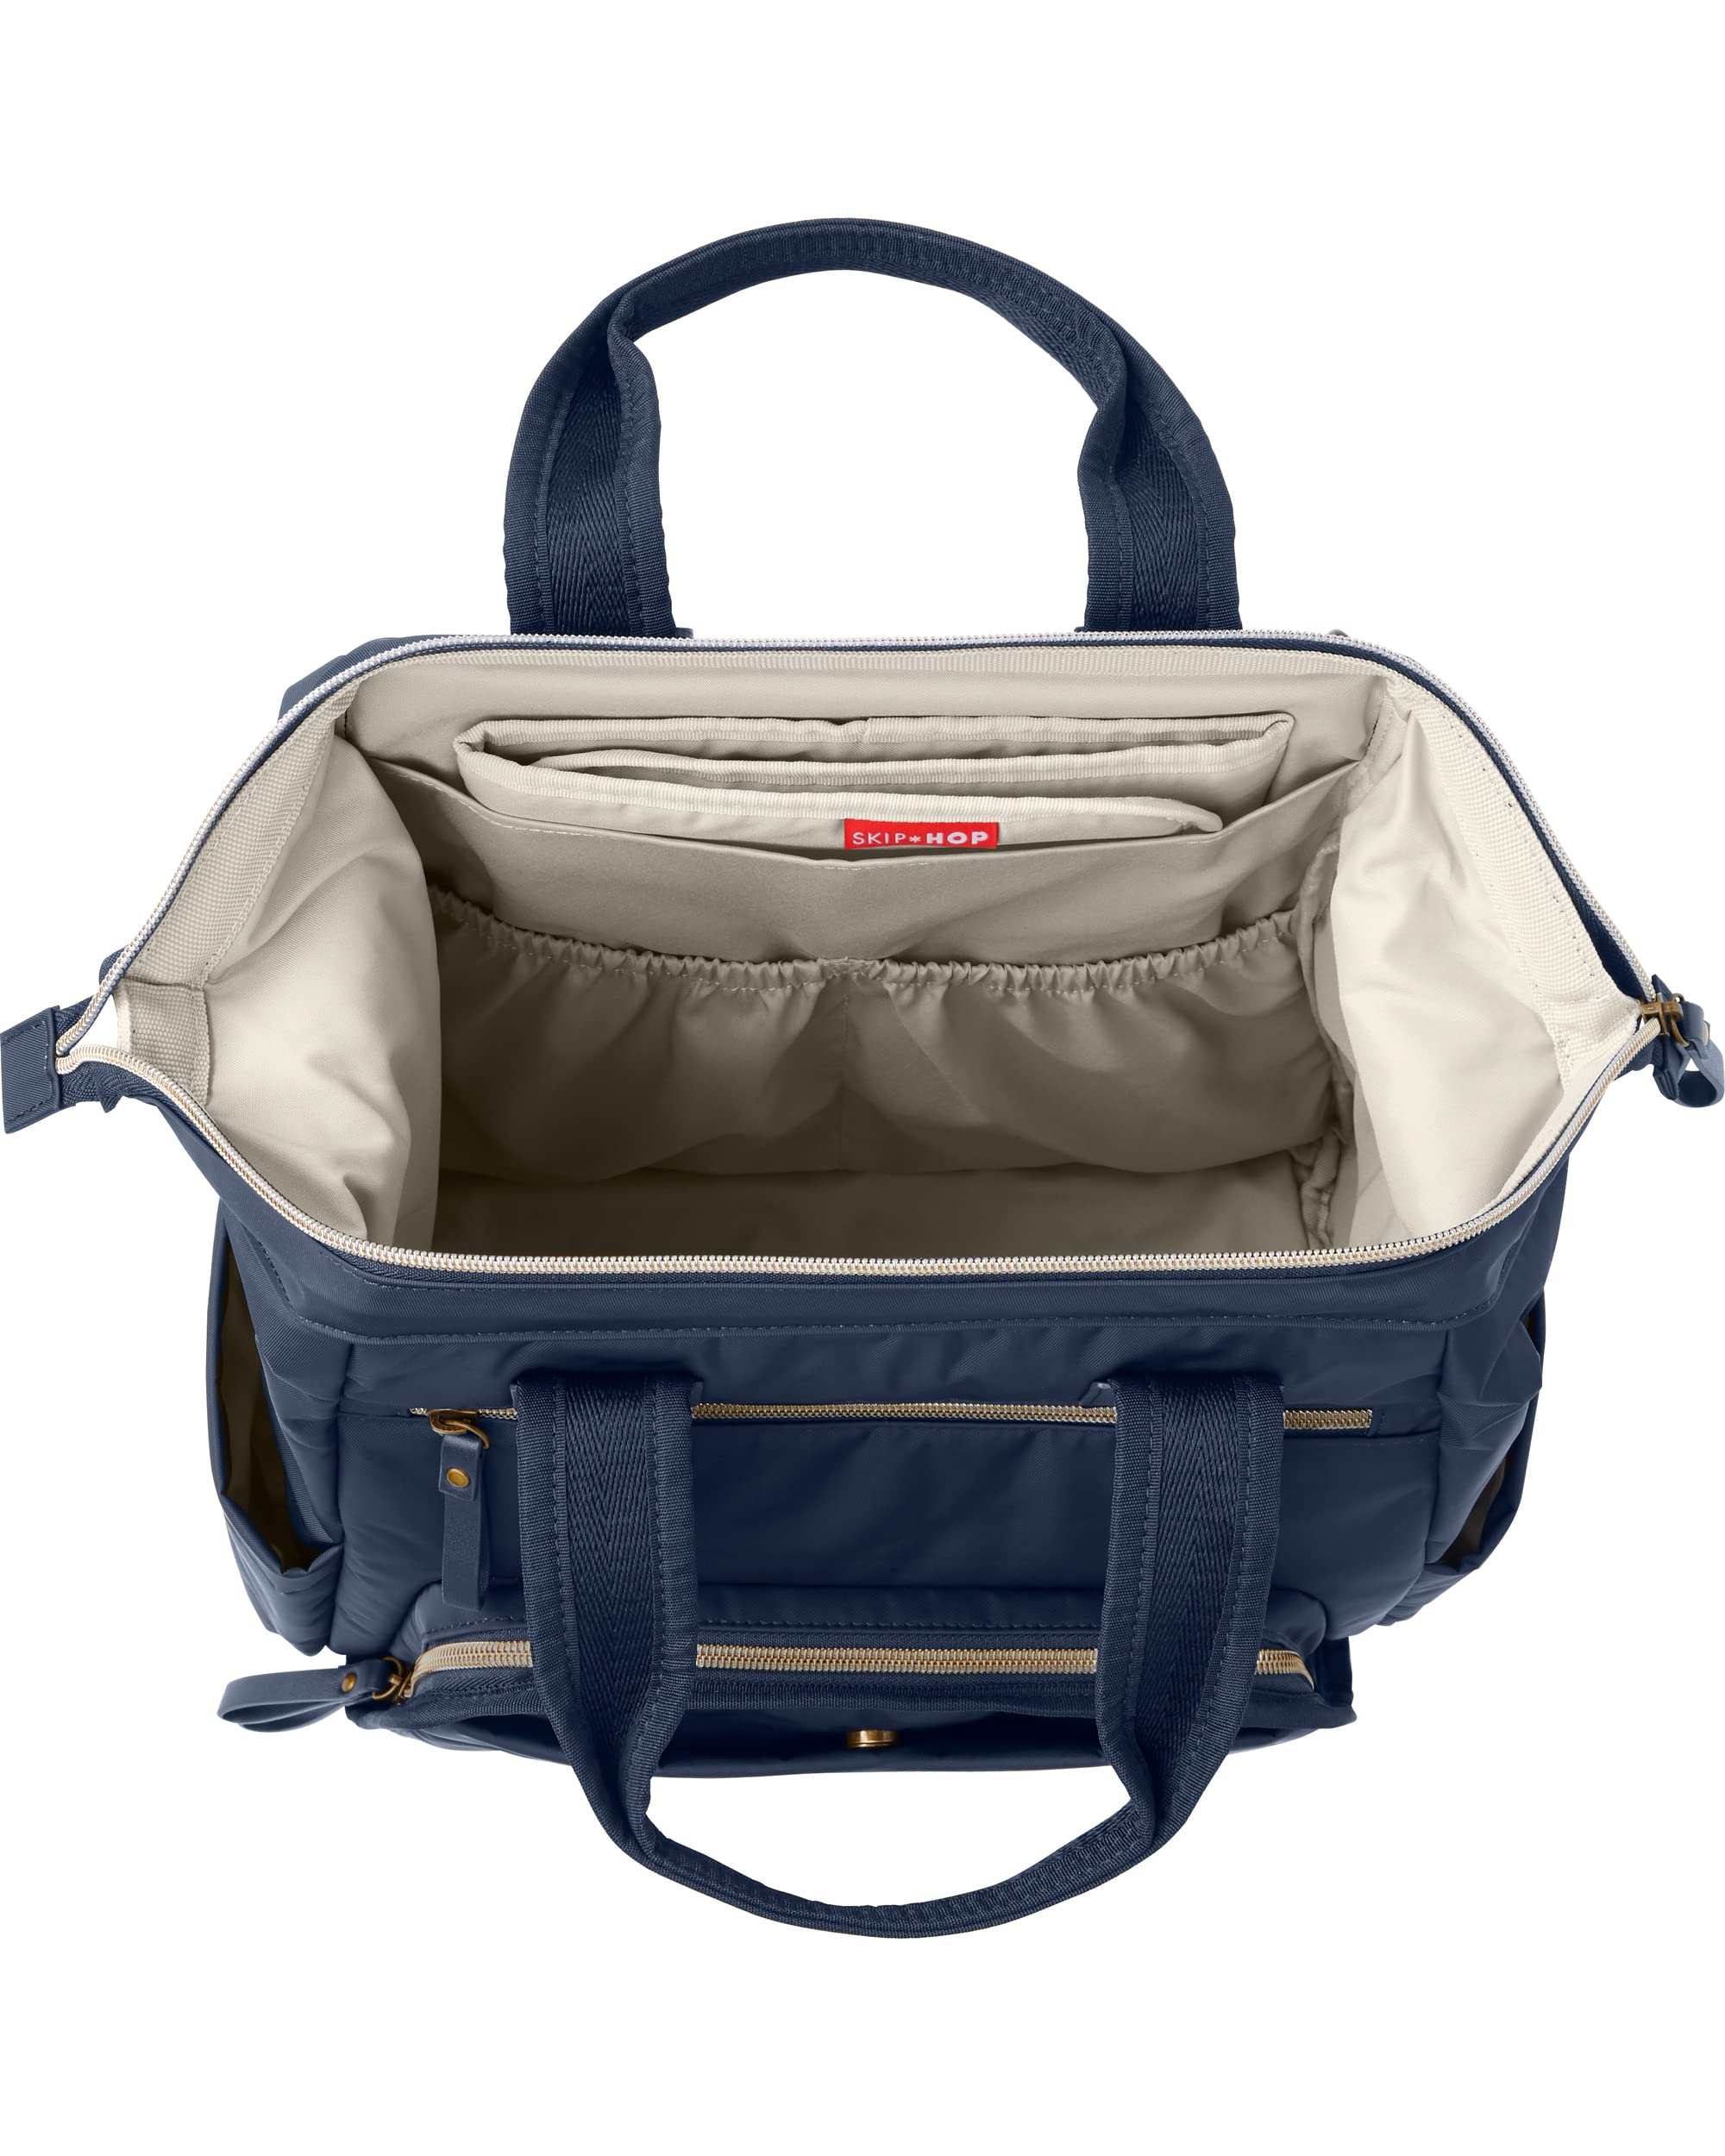 Skip Hop Diaper Bag Backpack: Mainframe Large Capacity Wide Open Structure with Changing Pad & Stroller Attachement, Midnight Navy